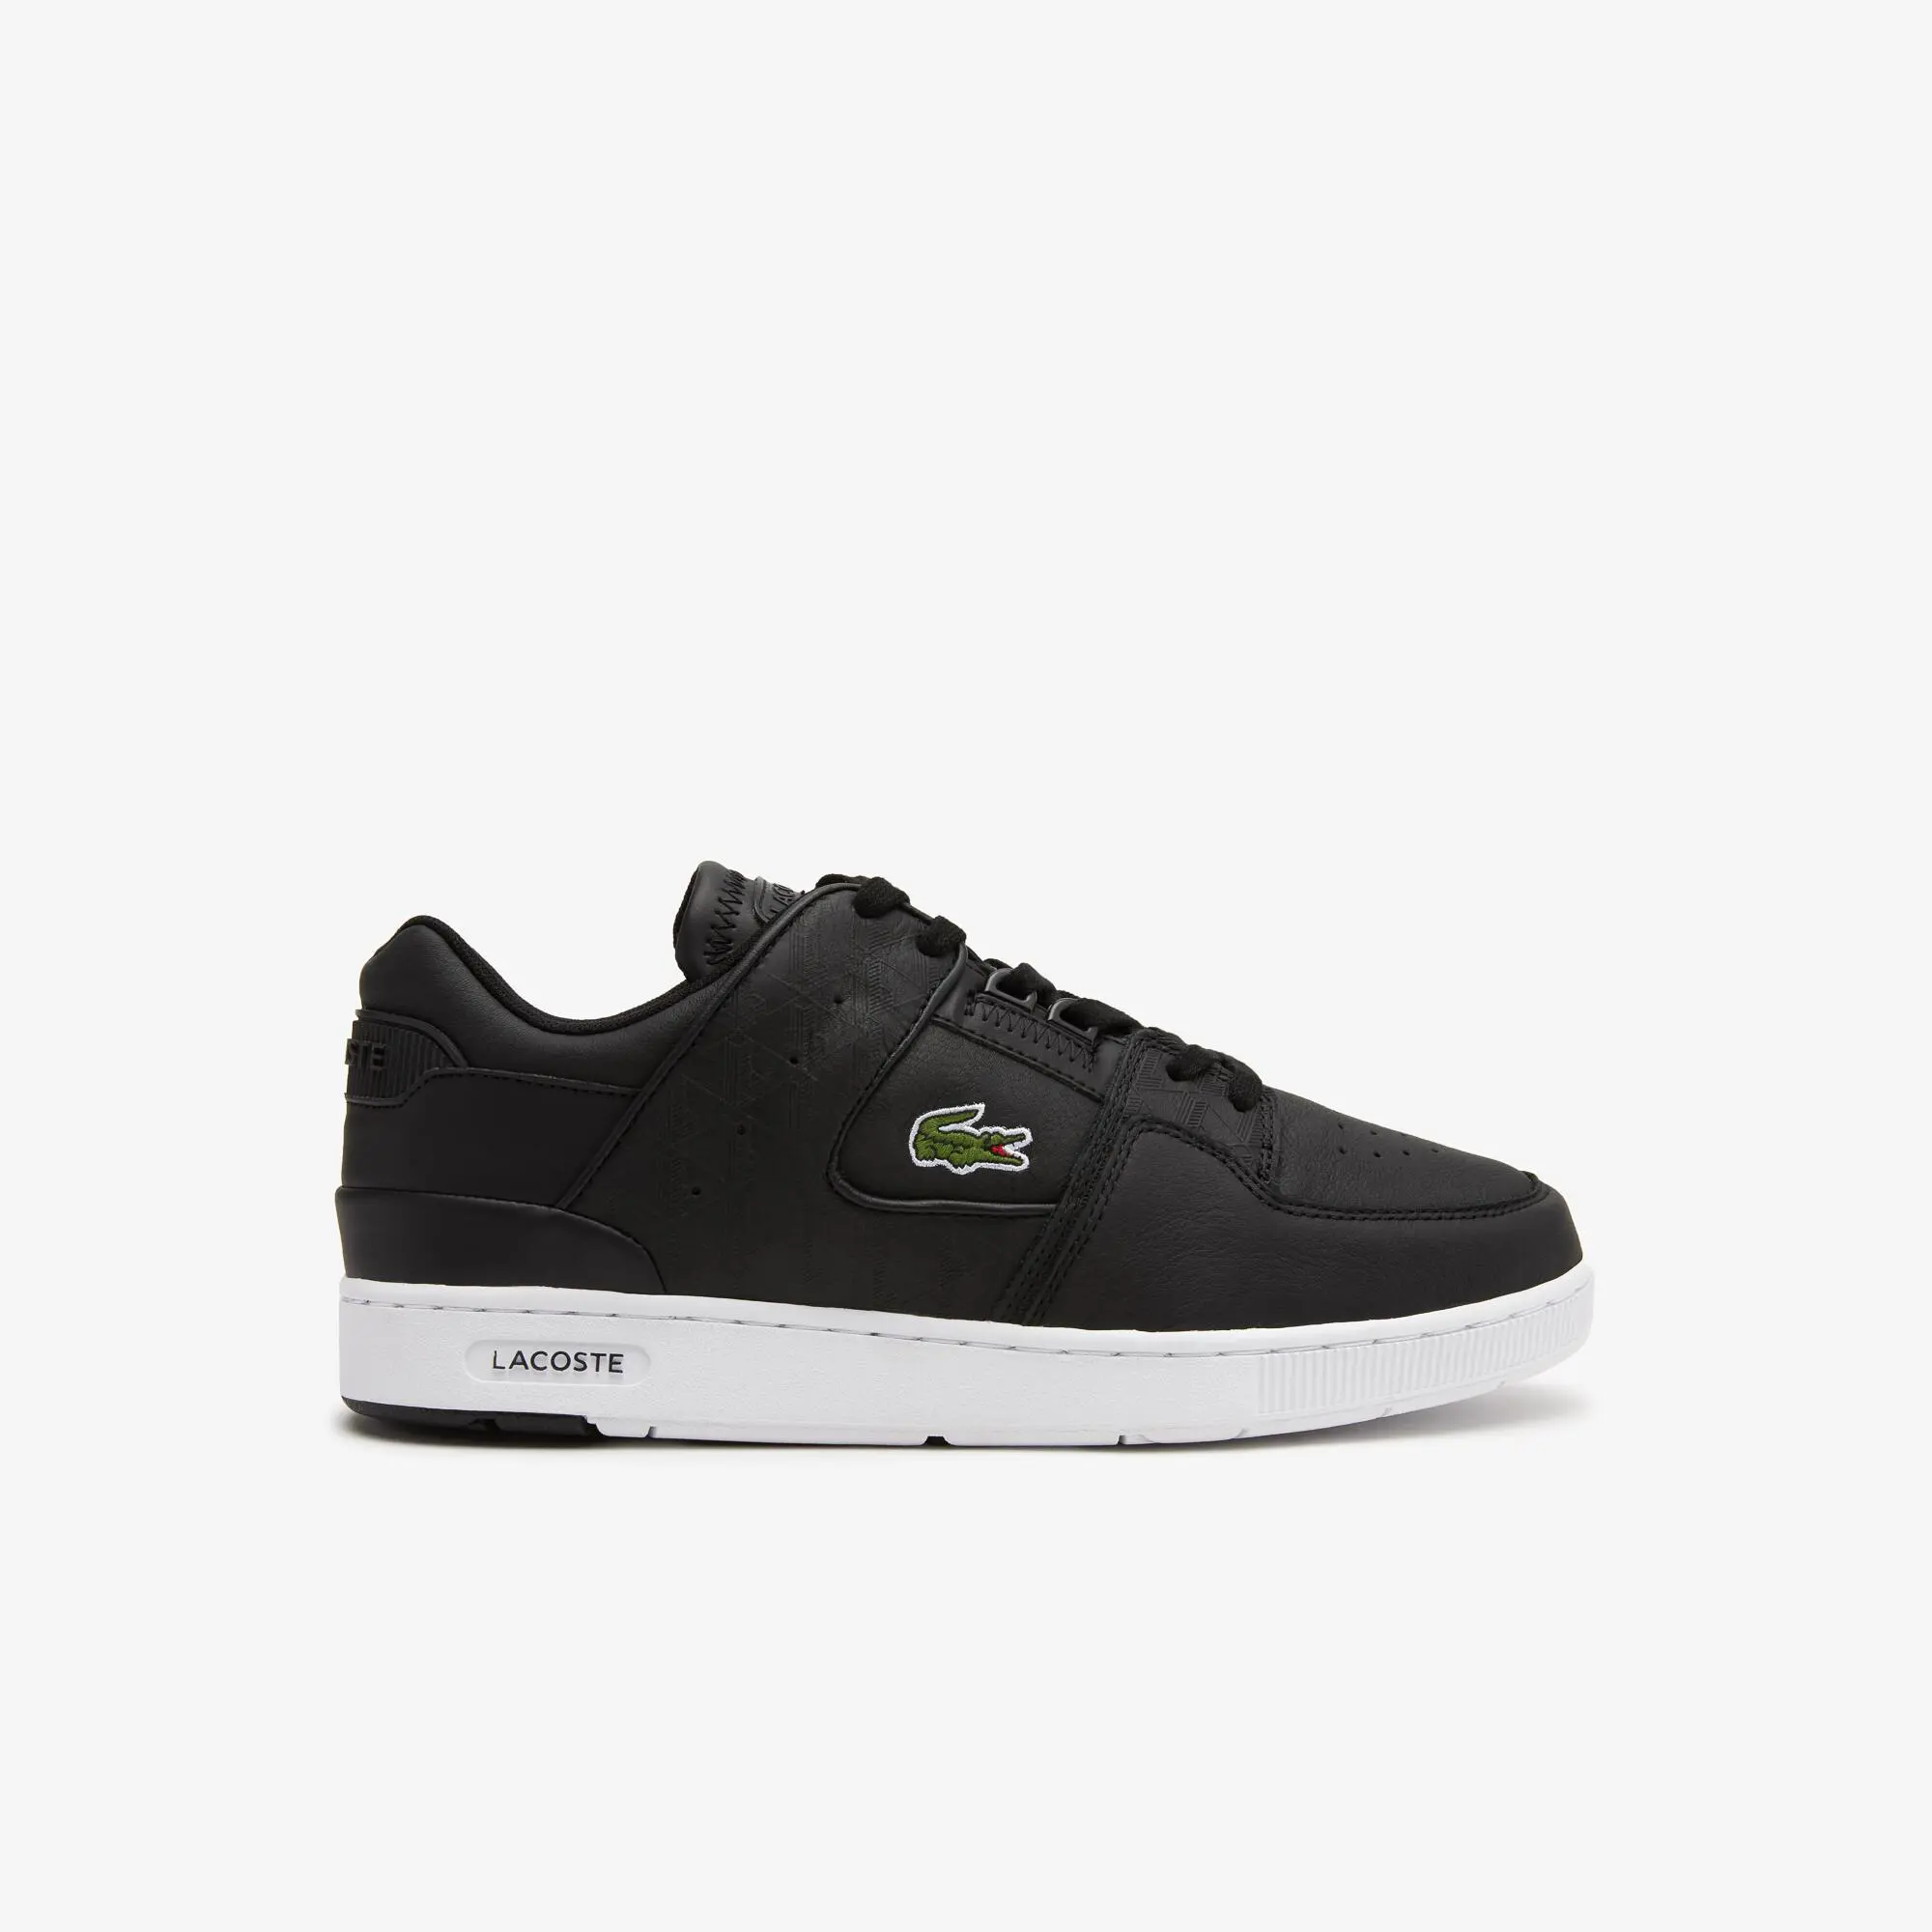 Lacoste Men's Lacoste Court Cage Leather Trainers. 1